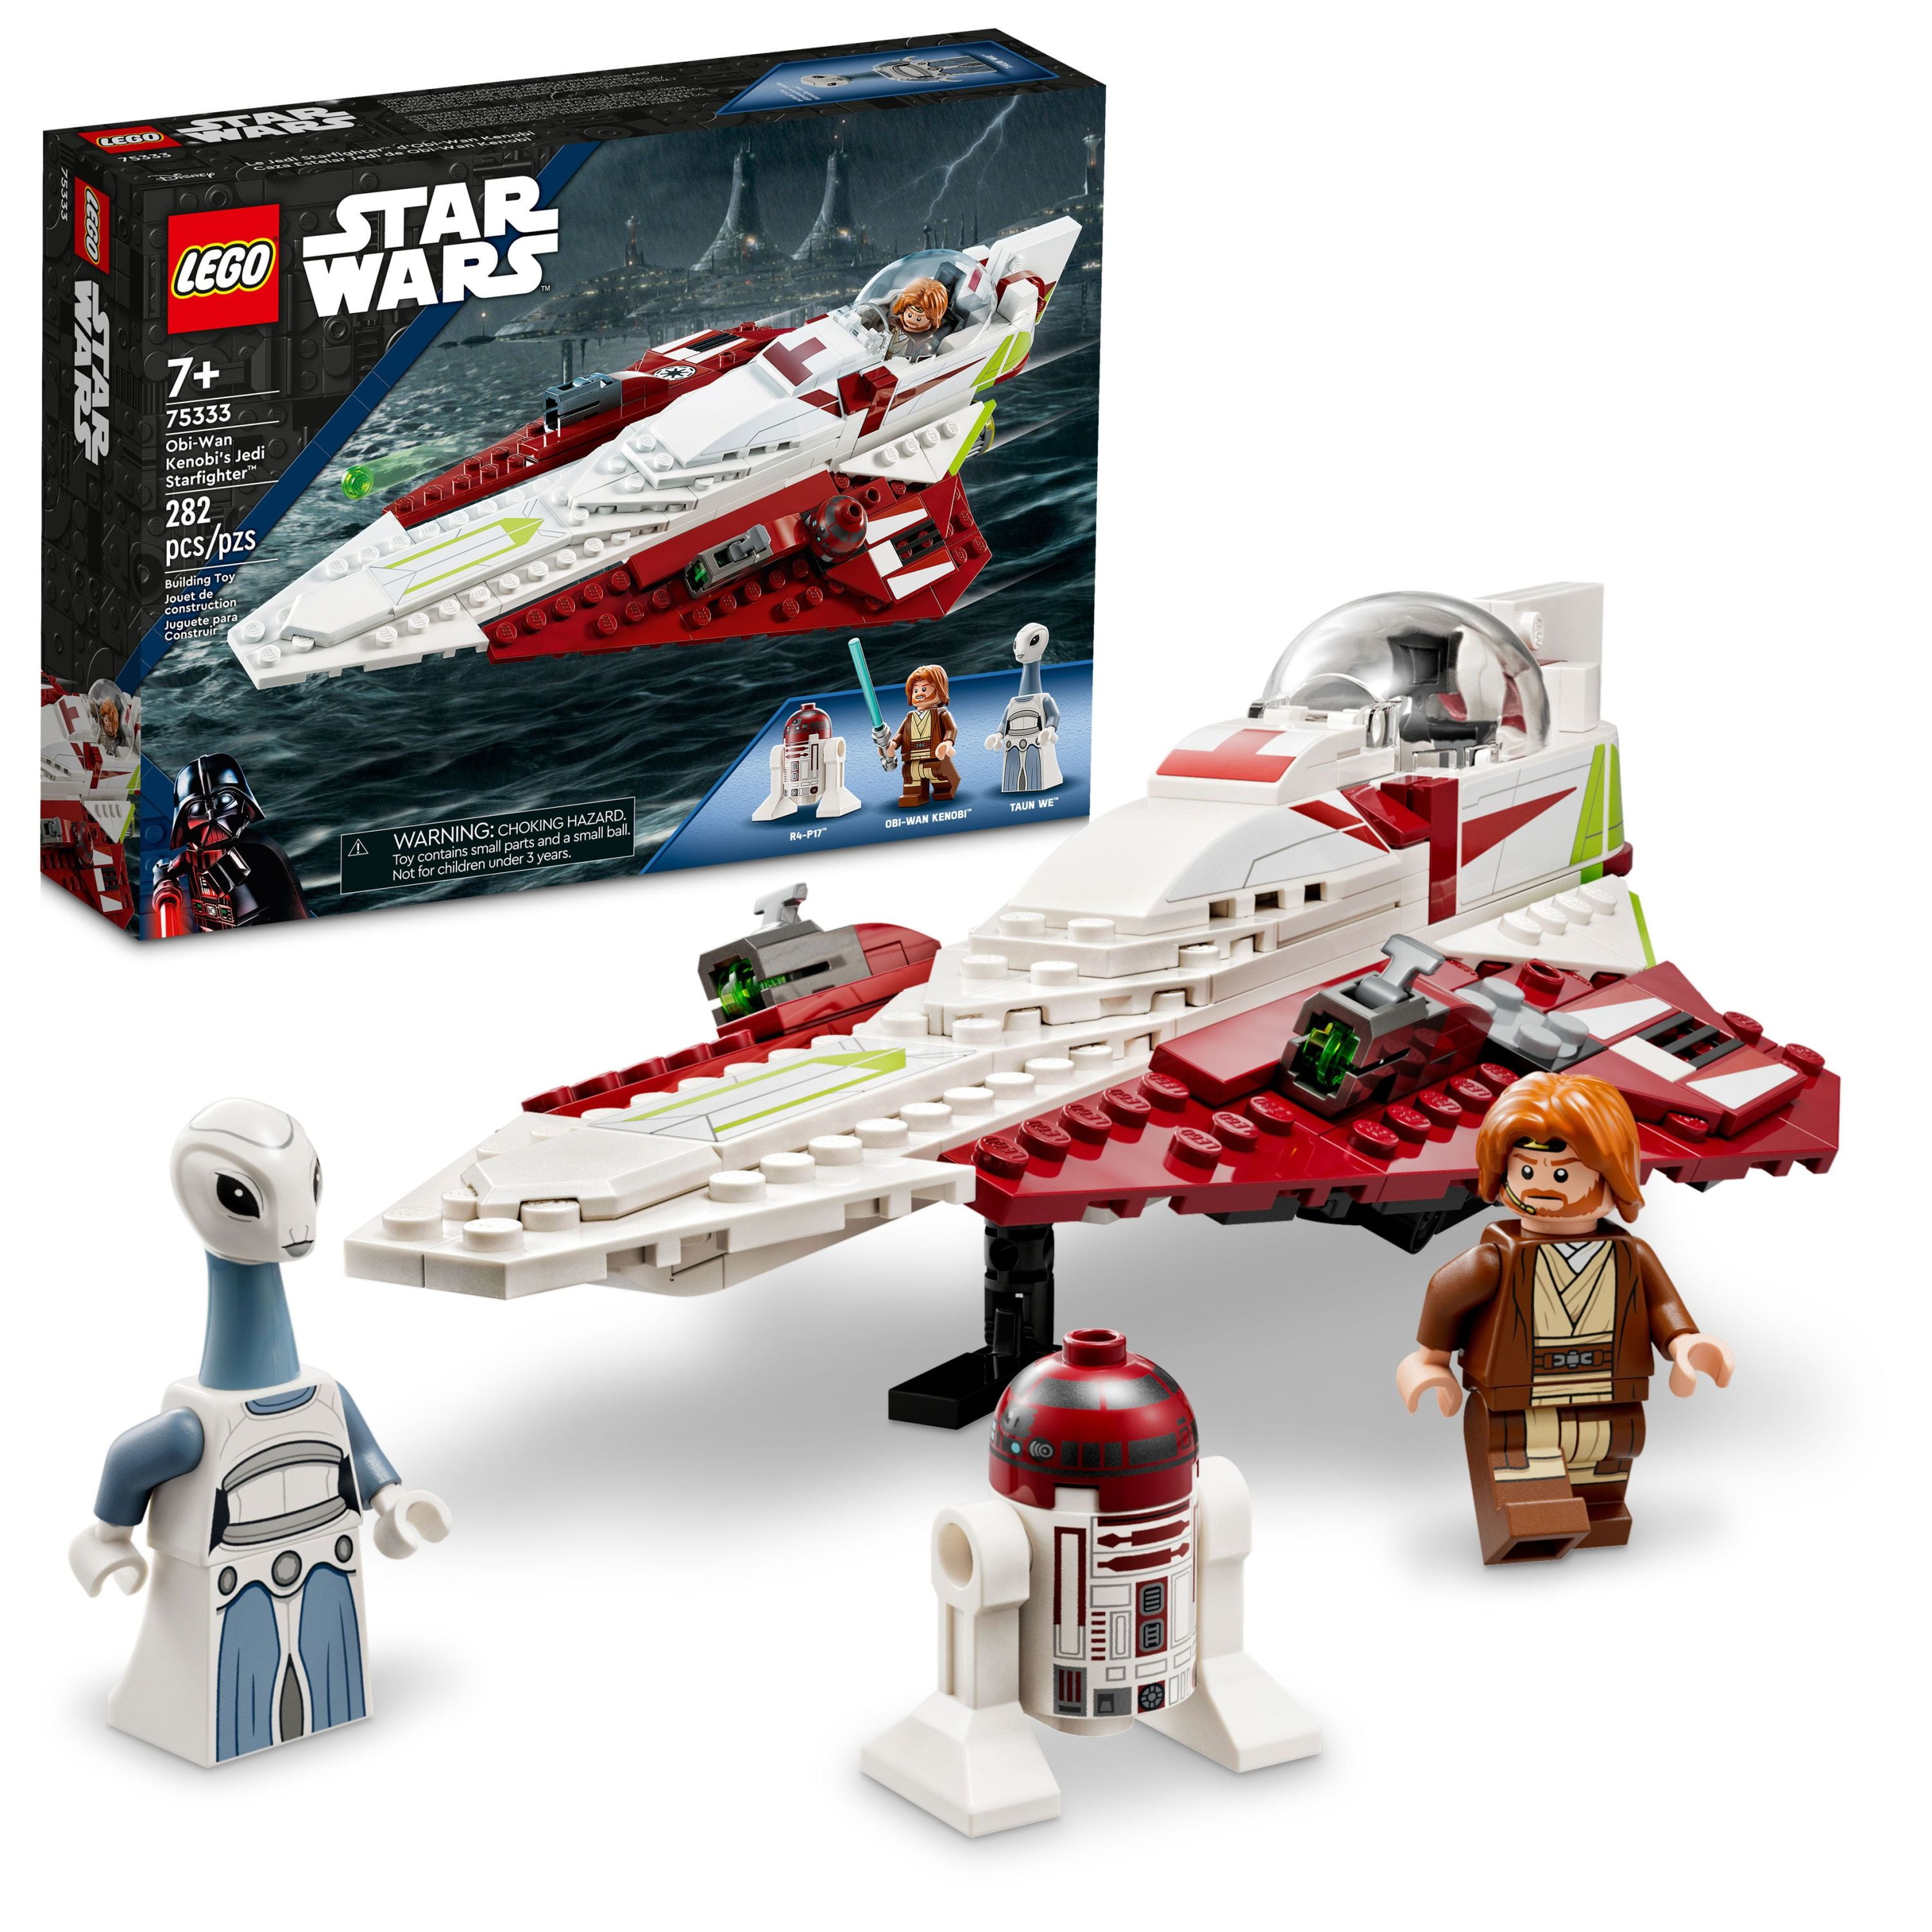 LEGO Star Wars Obi-Wan Jedi Starfighter 75333, Buildable Toy with Taun We Minifigure, Droid and Lightsaber, Attack of the Set - Walmart.com